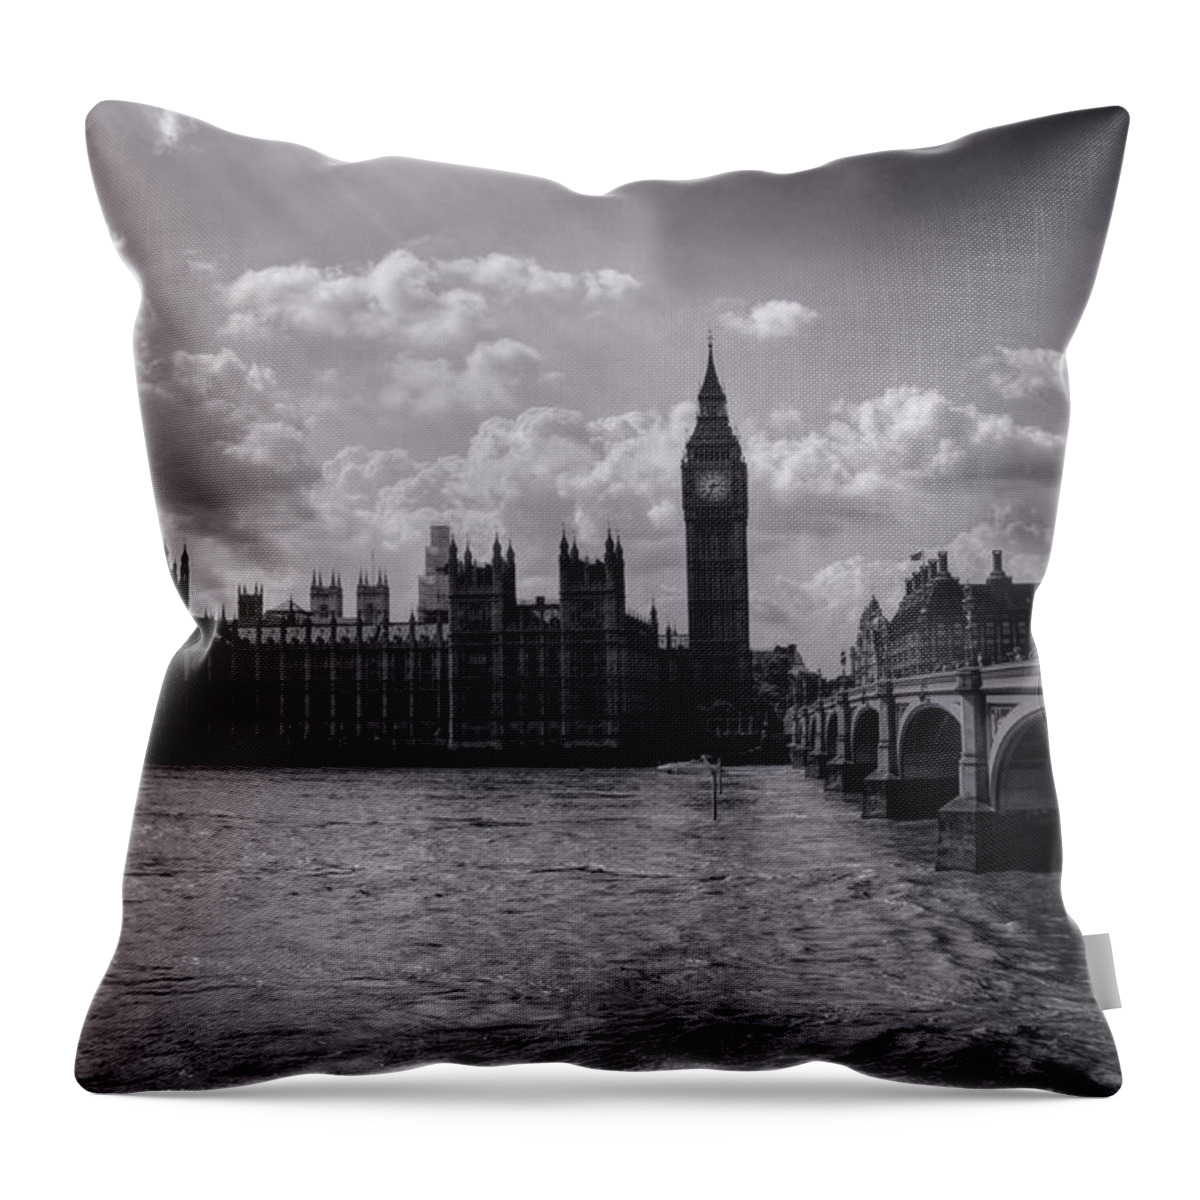 London Throw Pillow featuring the photograph Over Westminster Bridge by Nicky Jameson